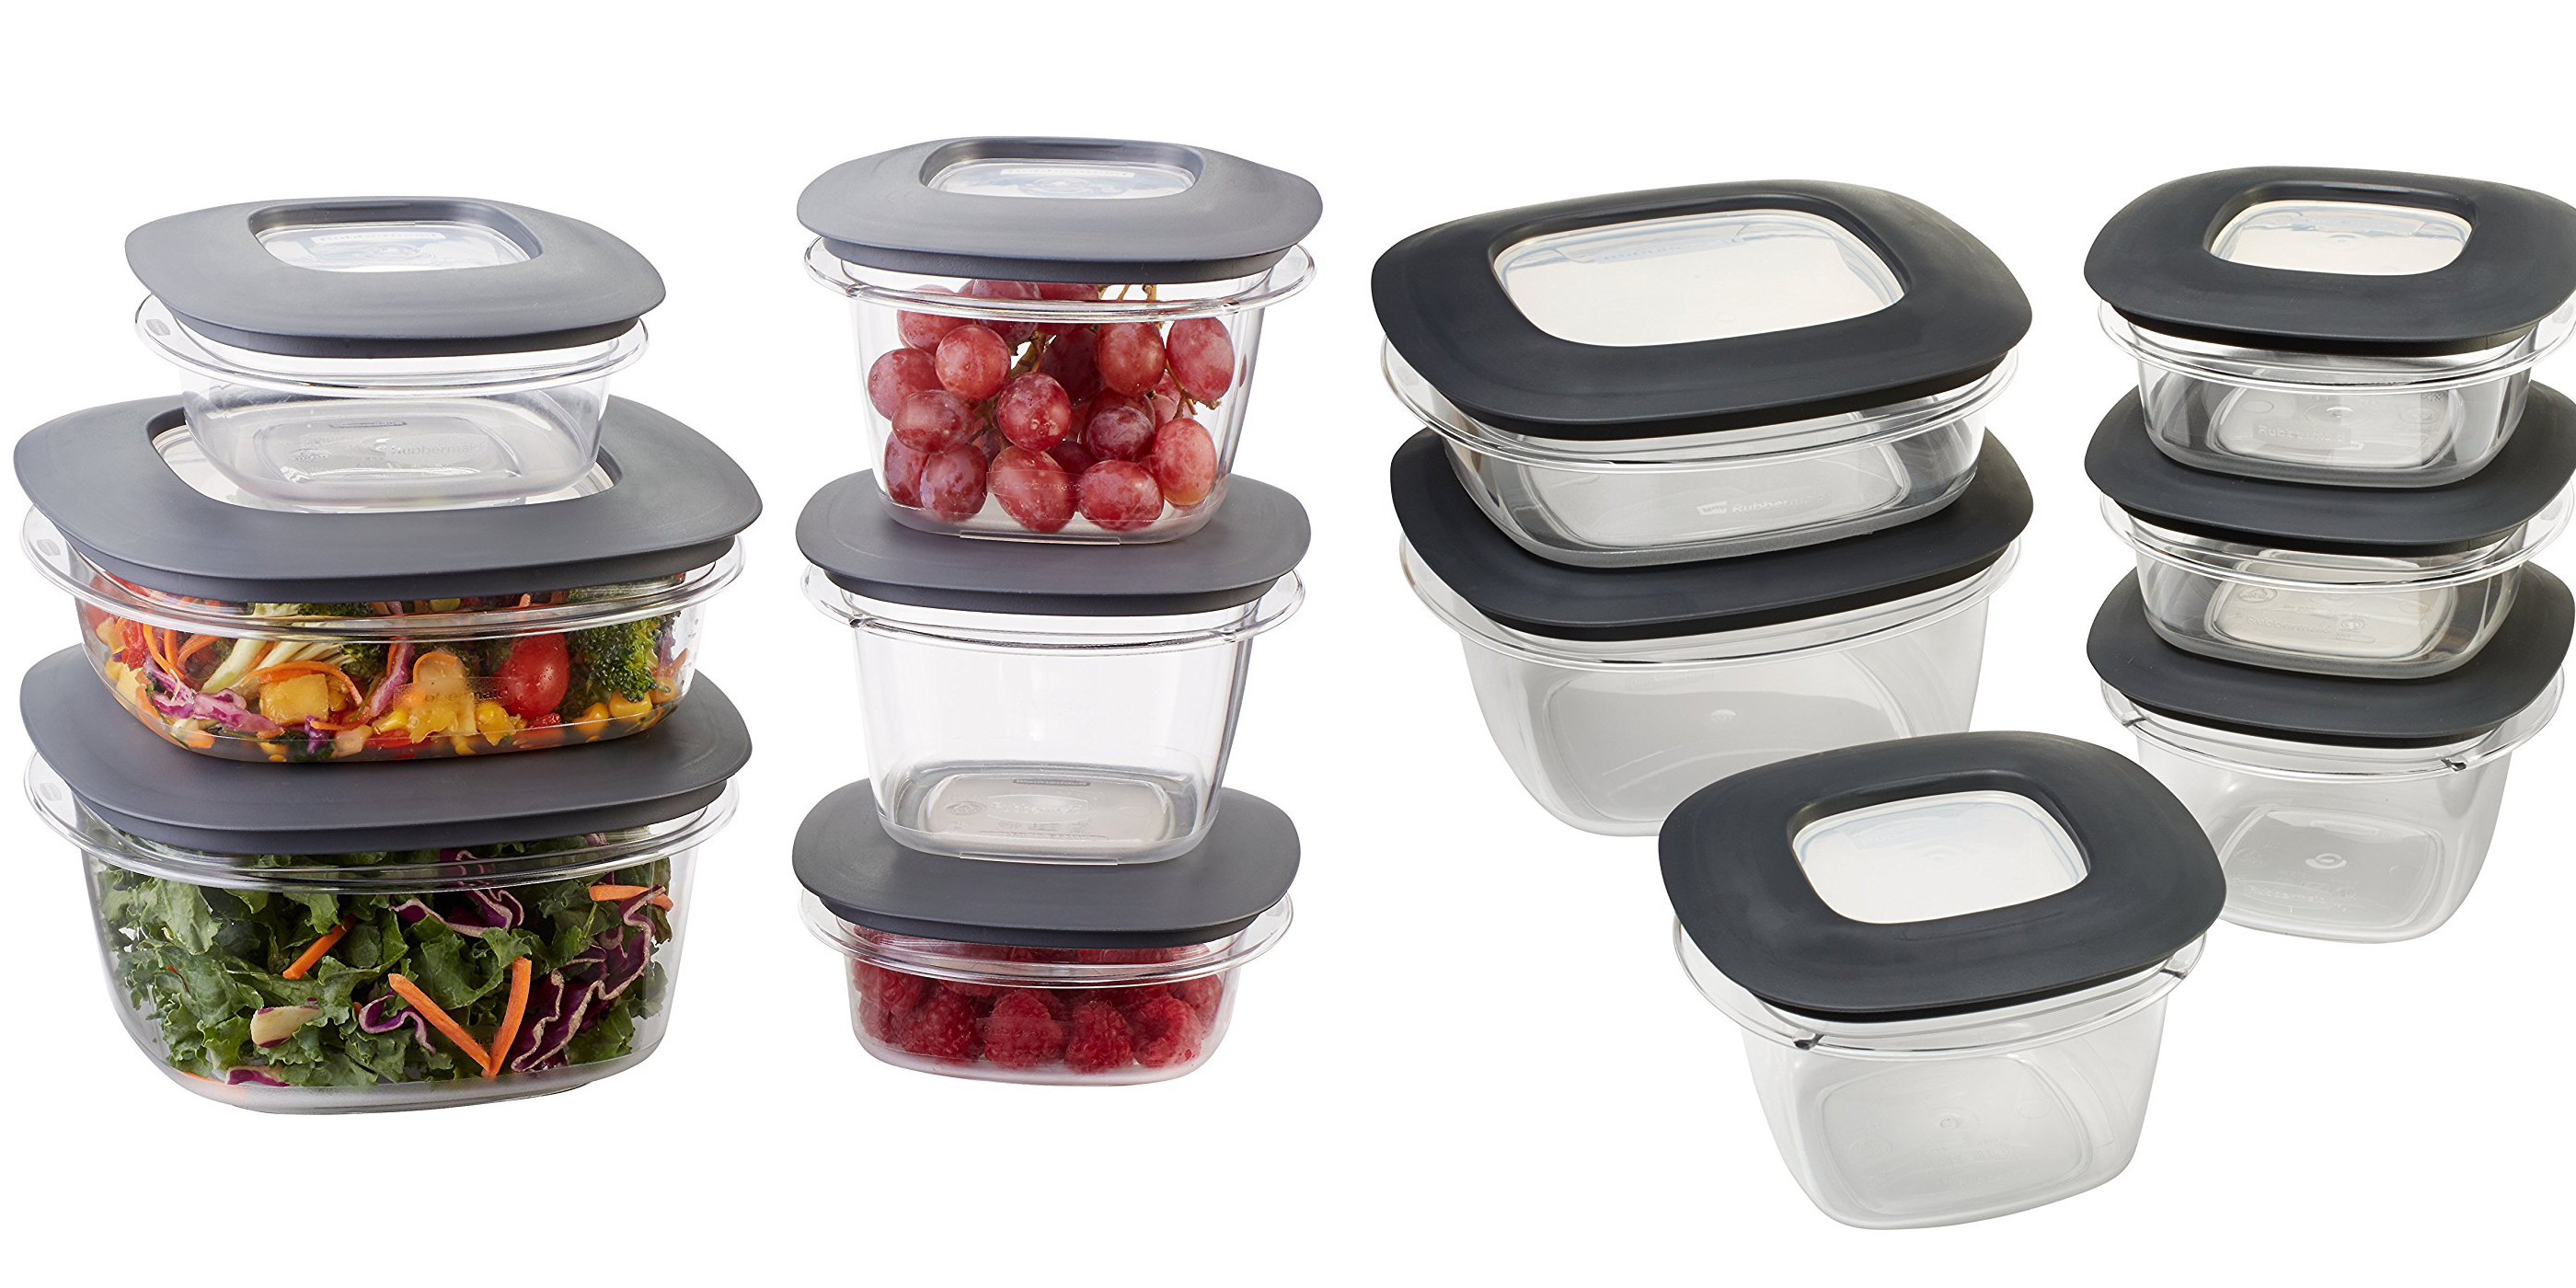 is offering the 12-Piece Rubbermaid Premier Food Storage